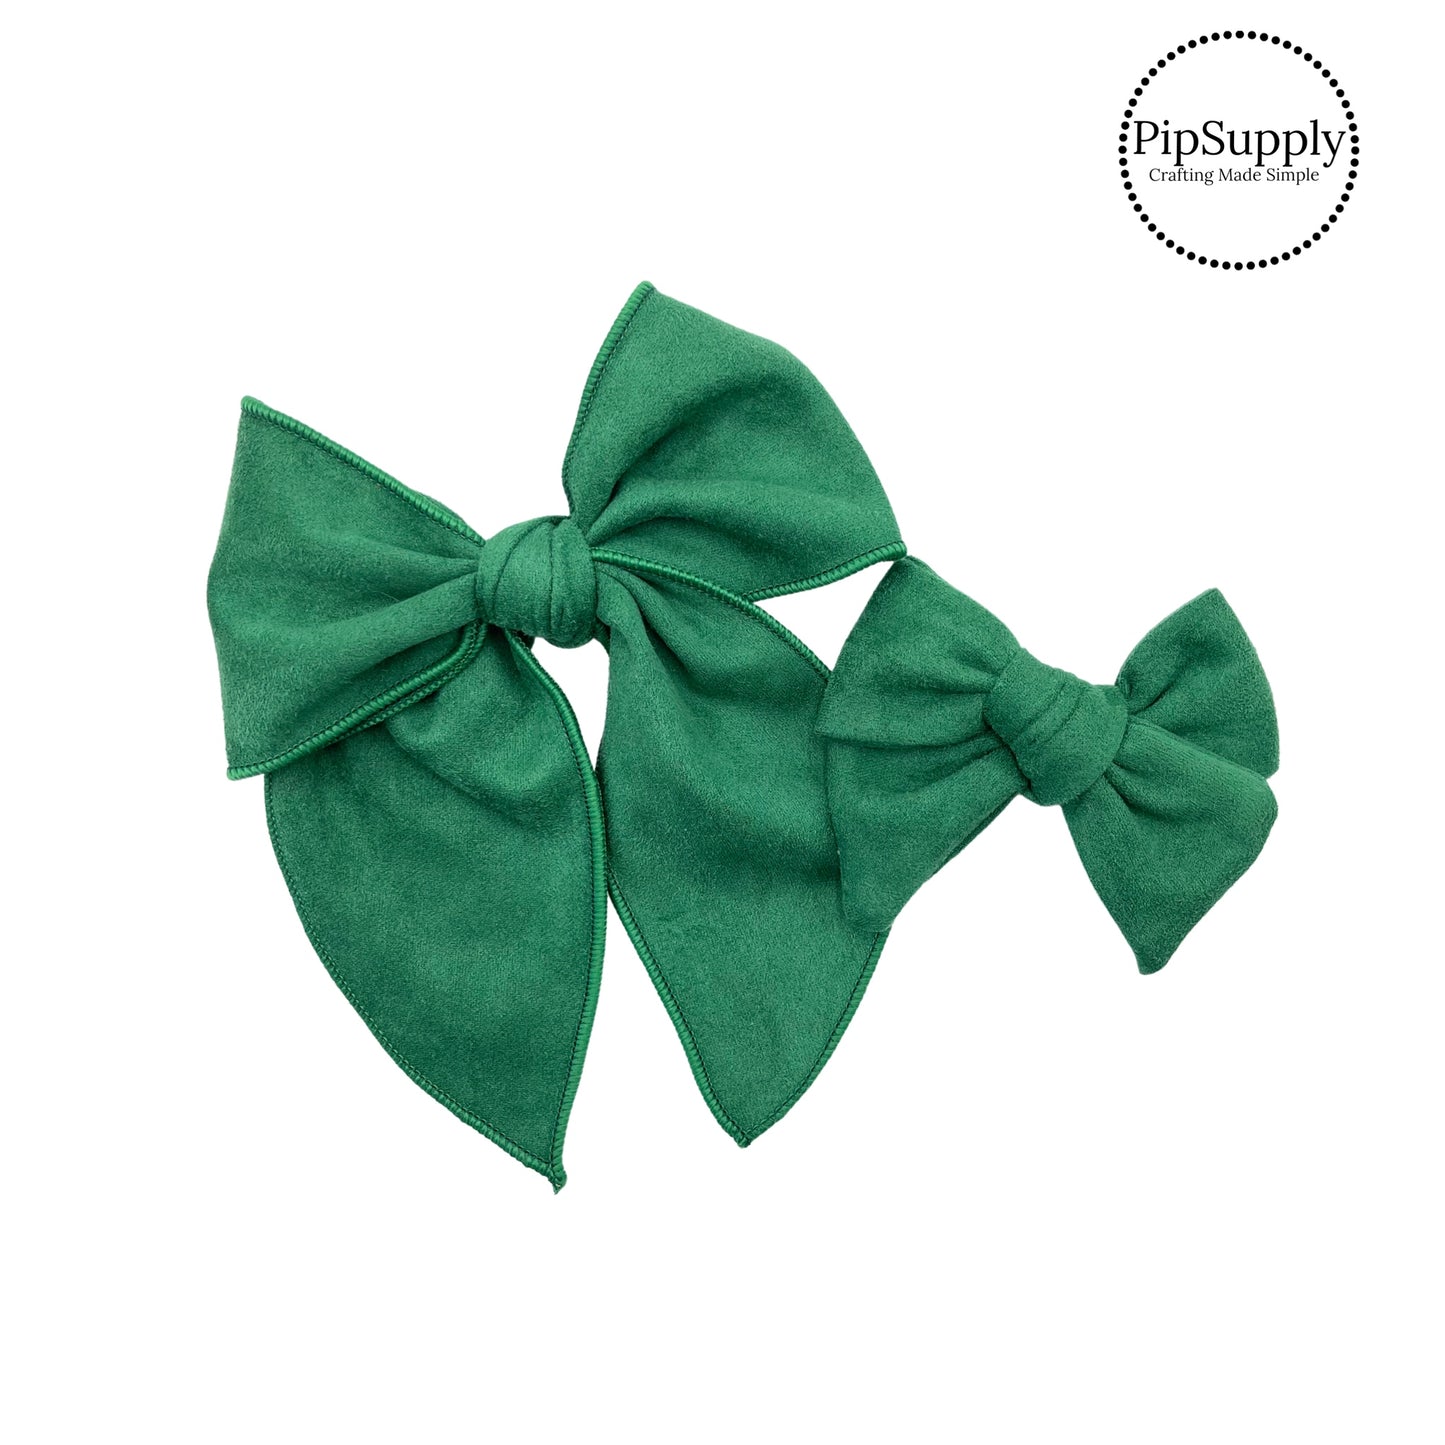 Emerald Green Soft Faux Suede Hair Bow Strips  - Tied